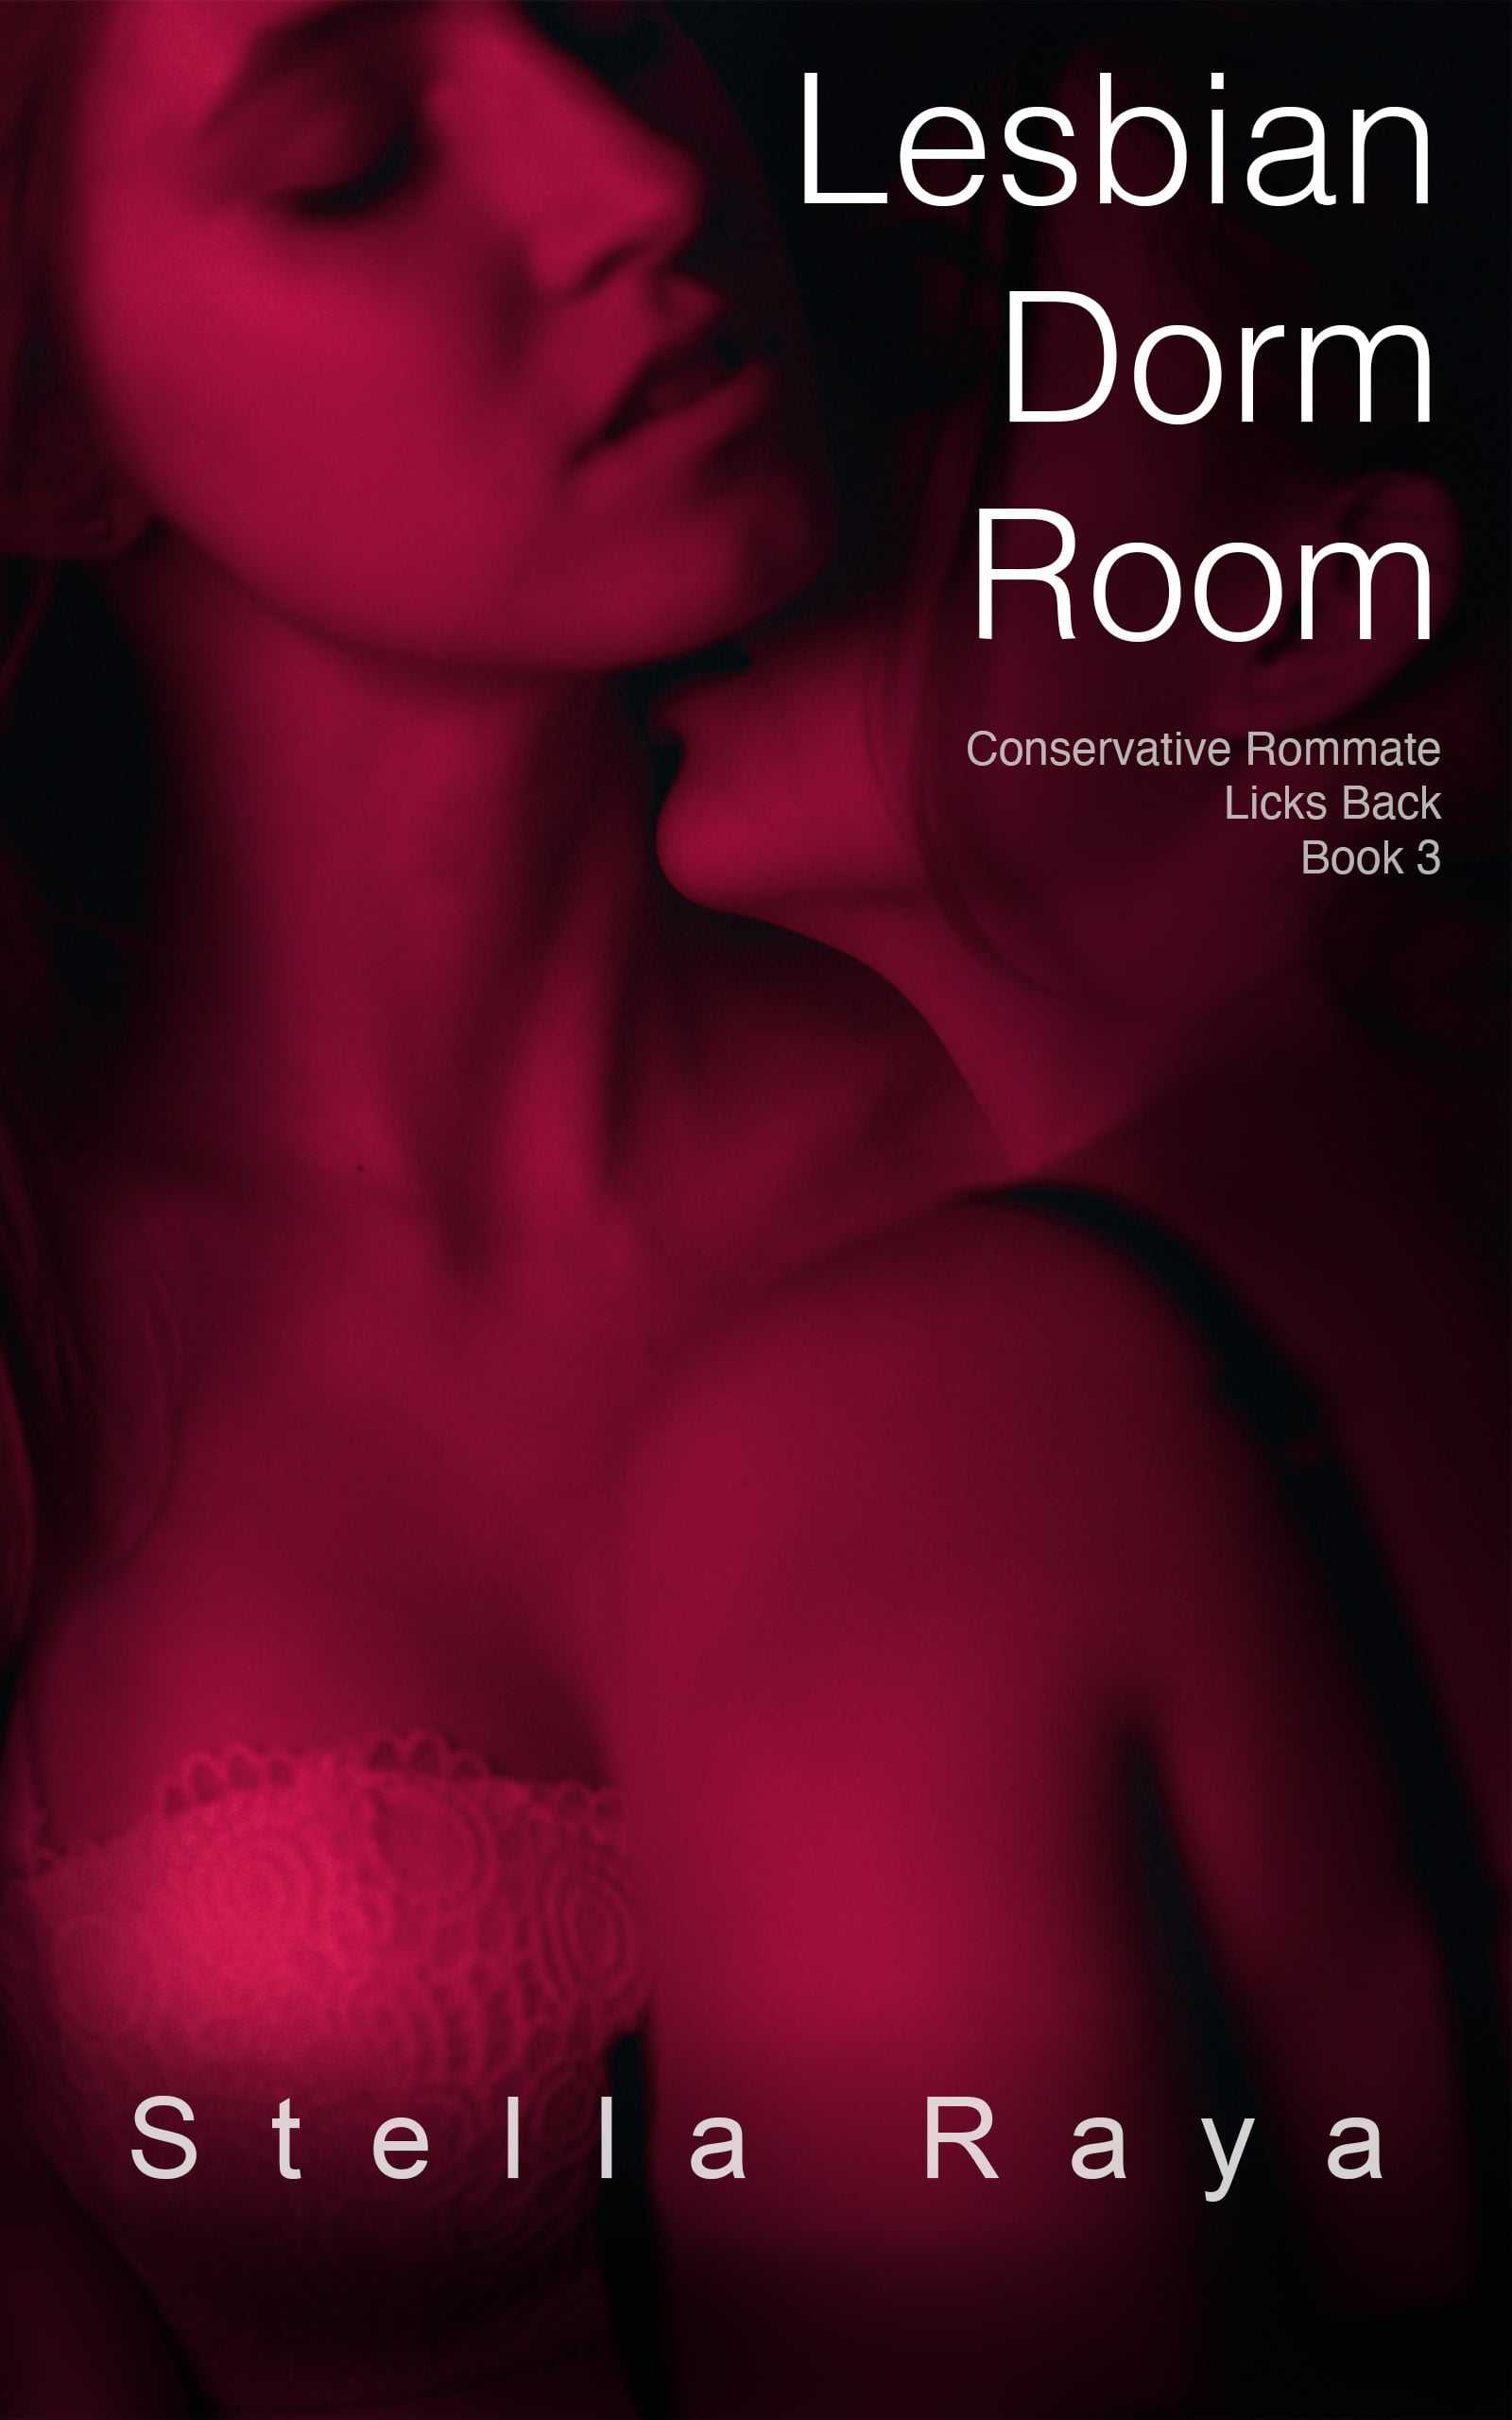 Lesbian Dorm Room Book 1 - Conservative Roommate Gets A Helping Hand